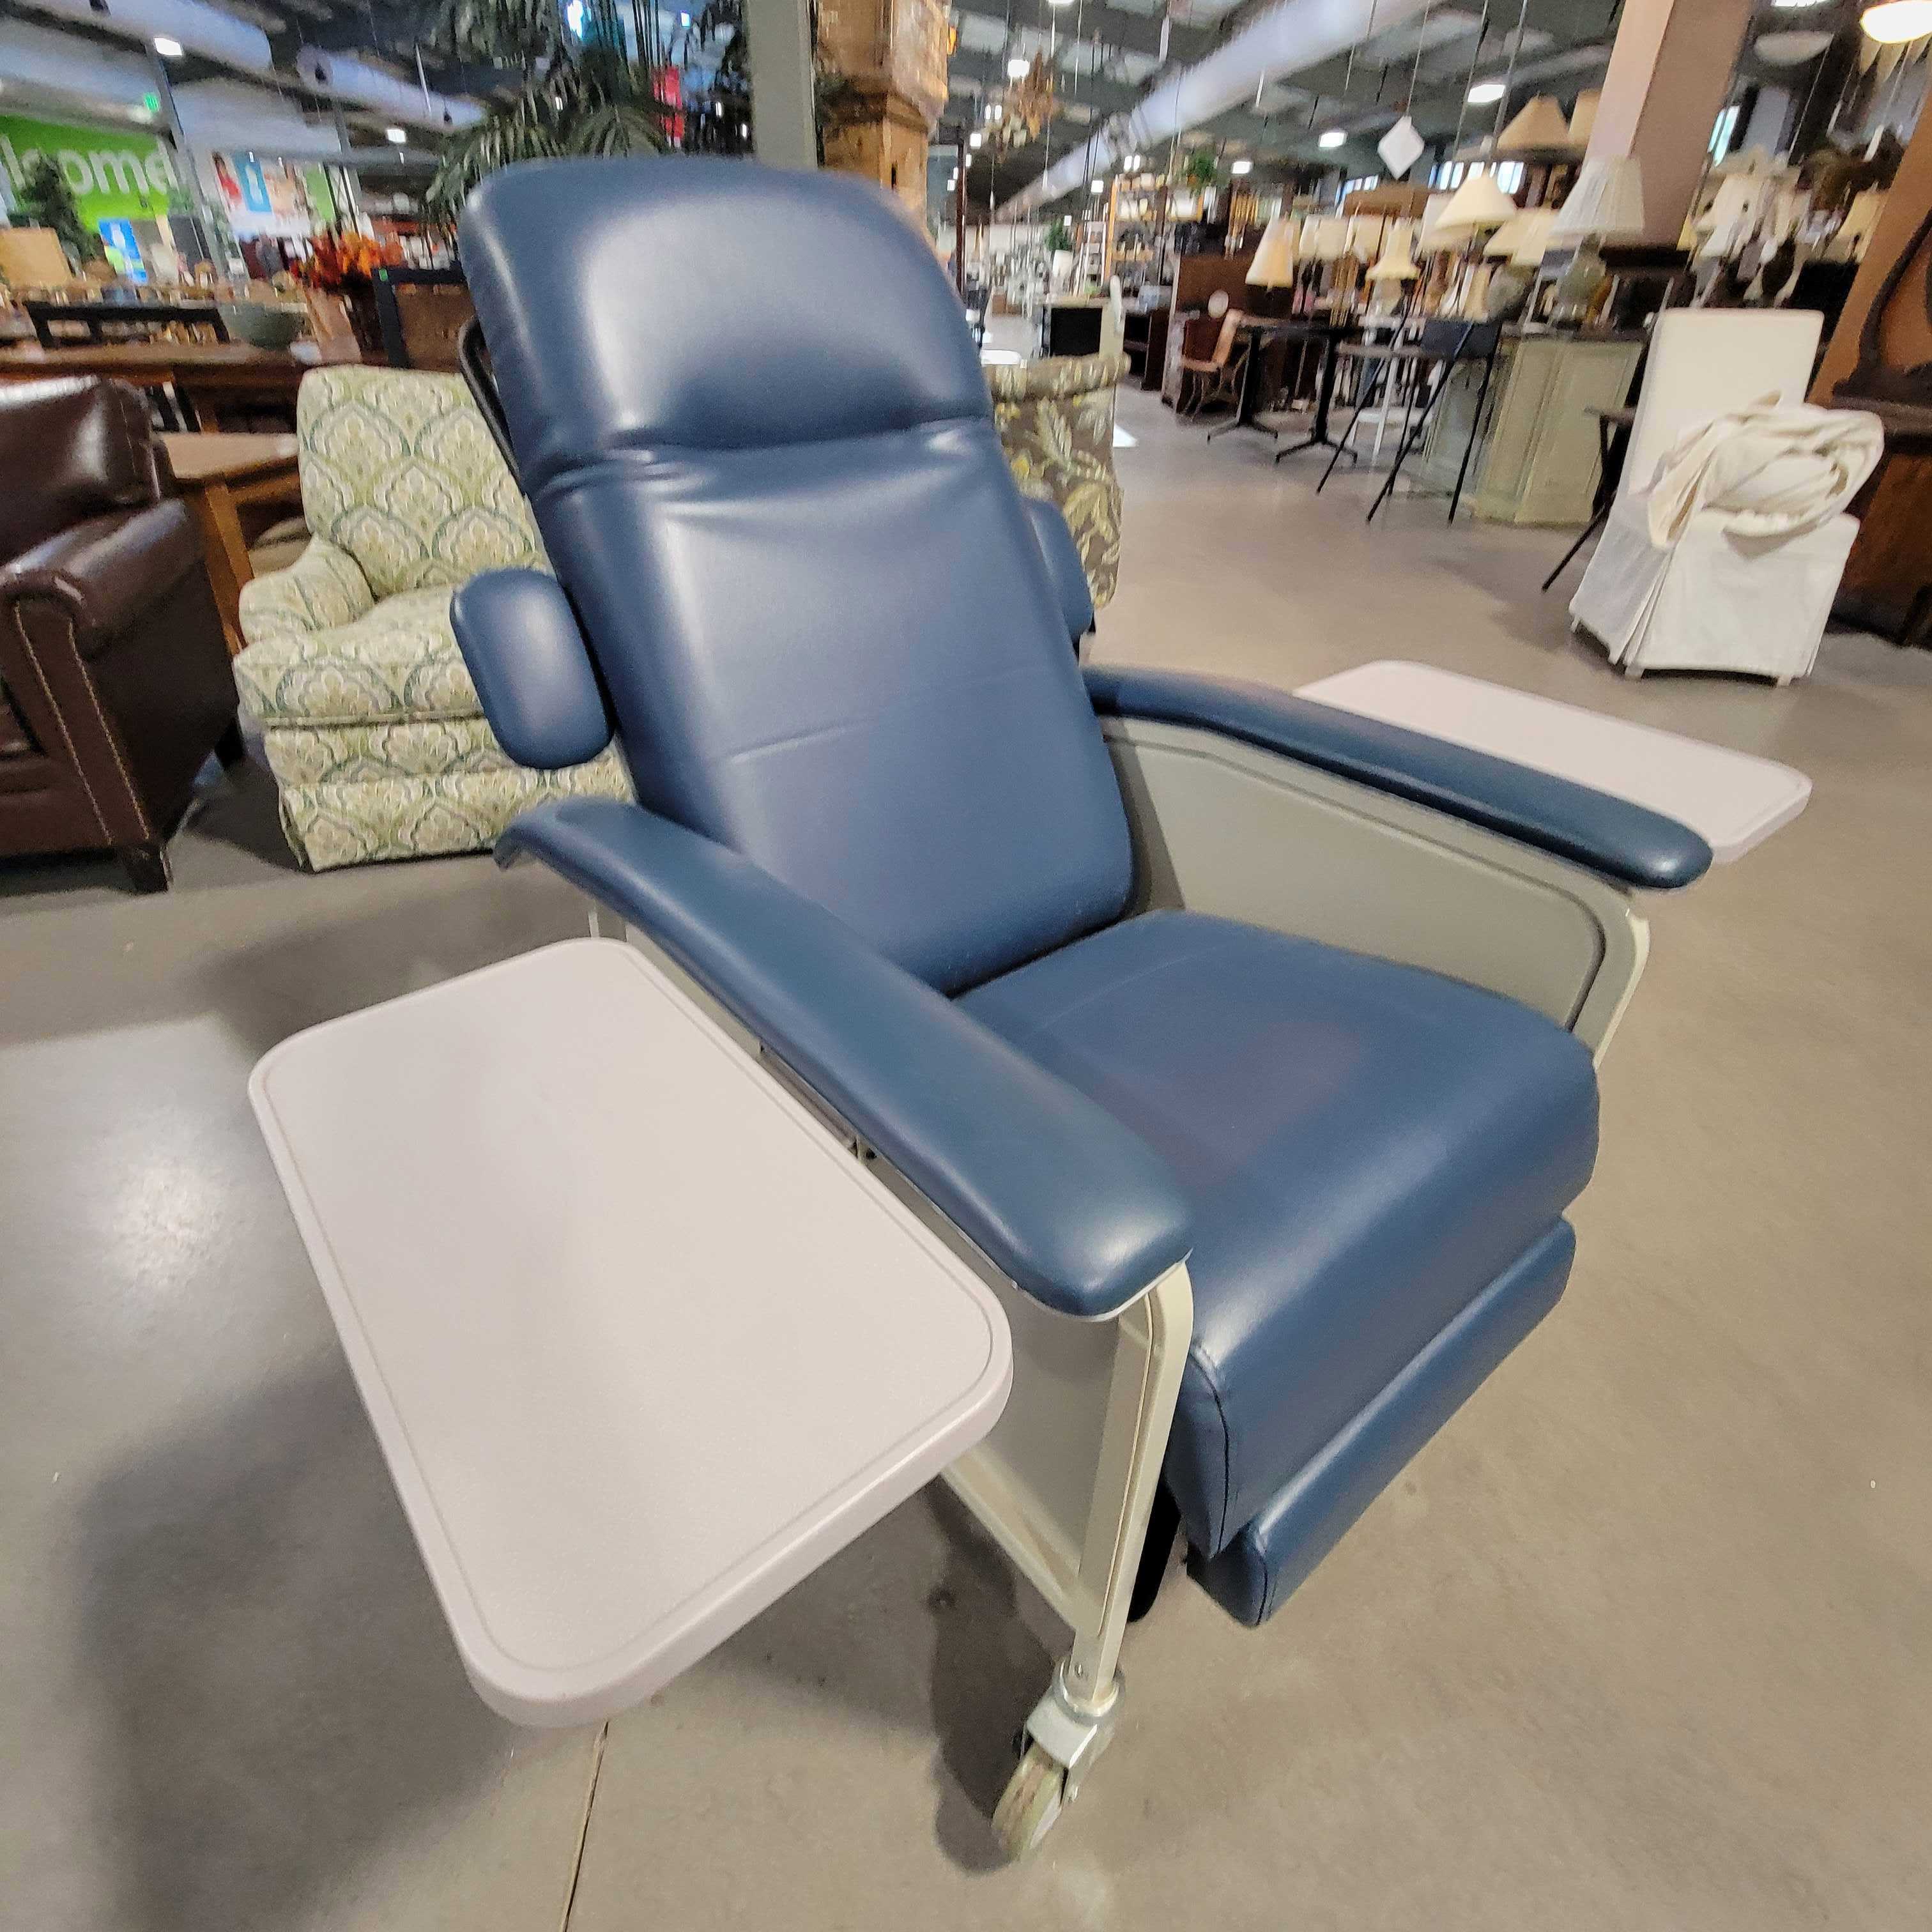 32"x 52"x 43" Drive Blue Medical Clinical Care Recliner